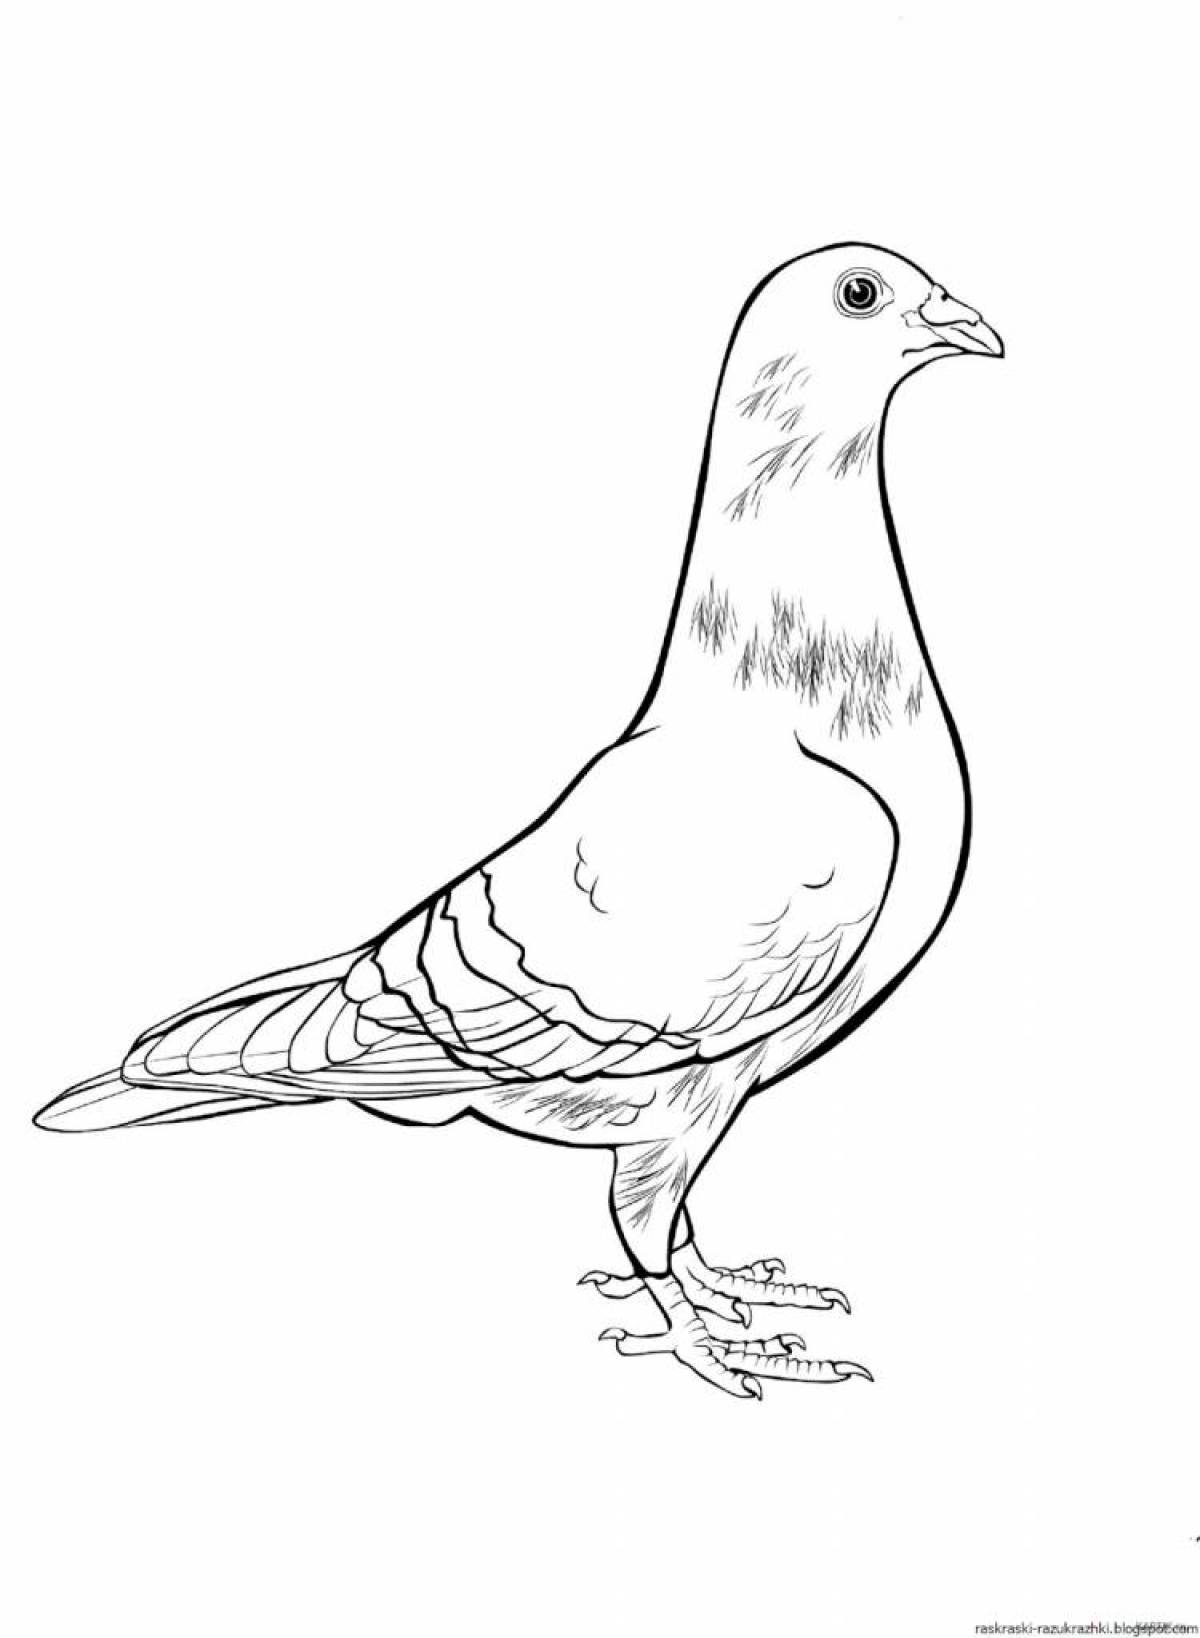 Coloring pages with pigeons for kids